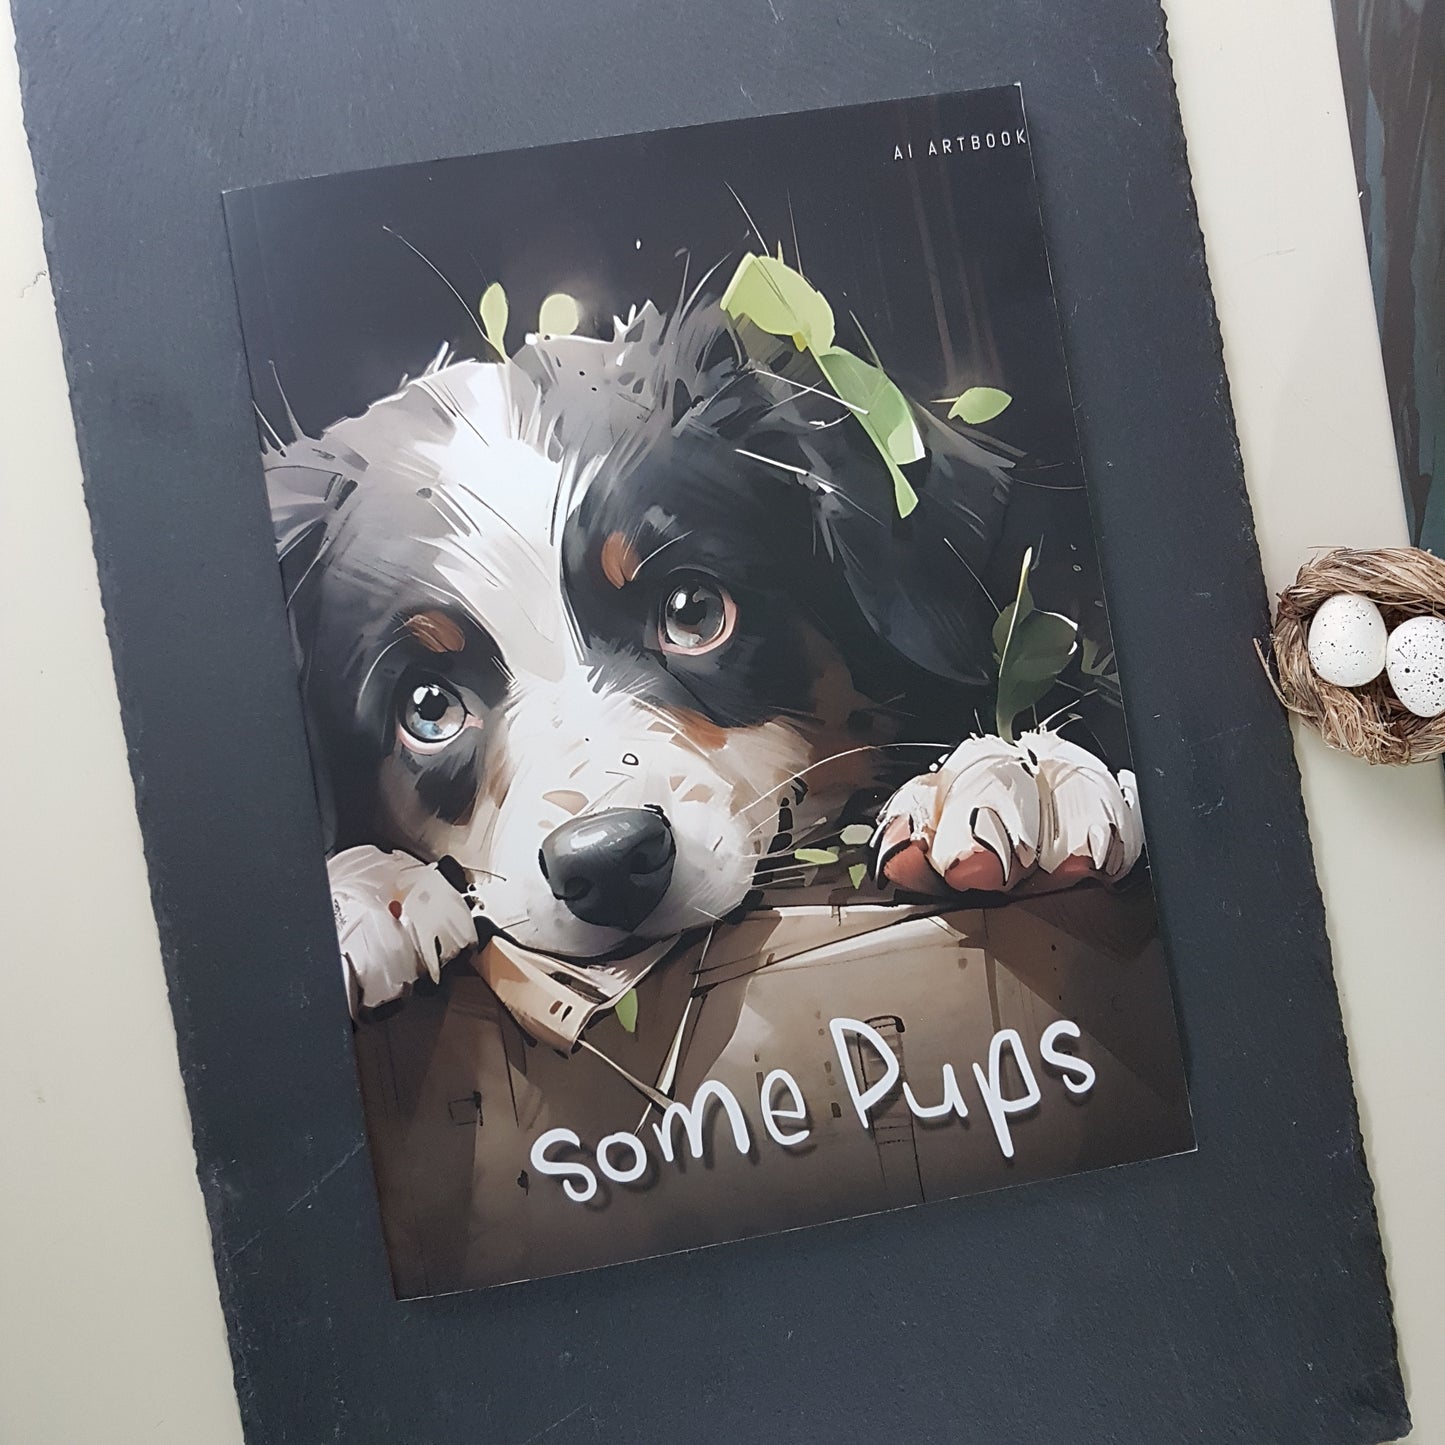 Some Pups" Softcover Photo Book - AI Artbook - dog art masterpieces - cuteness overload